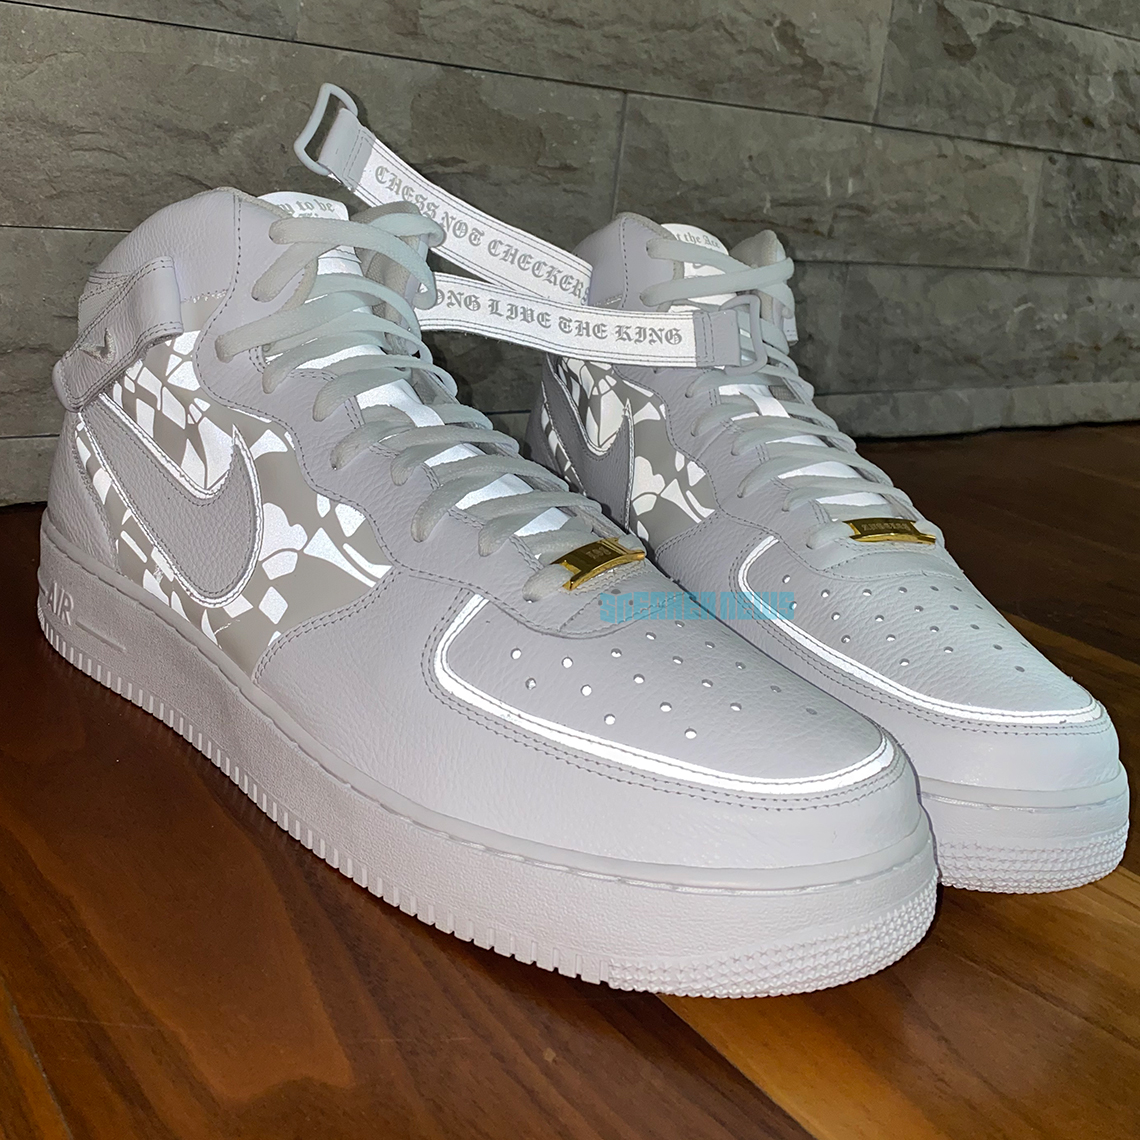 LeBron James Shows Off Nike x Tiffany & Co. Air Force 1s on